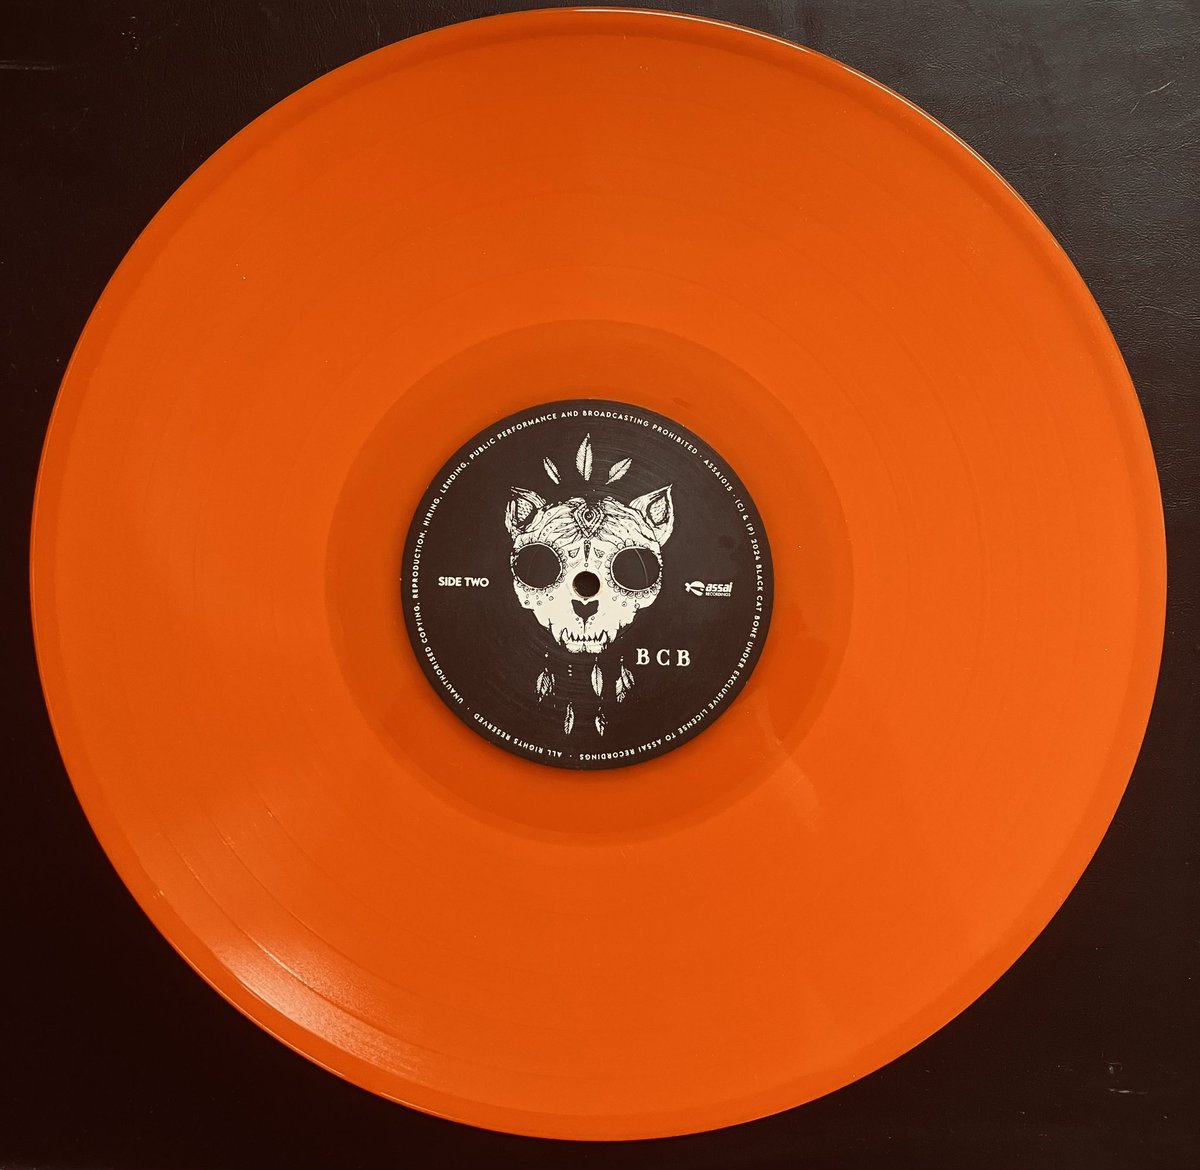 Our Limited edition orange vinyl is FINALLY out today🙌🏼 Thank you everyone who has bought their copy. Available from Assai.co.uk 

Grab me while they’re hot 🌶️ 🌶️